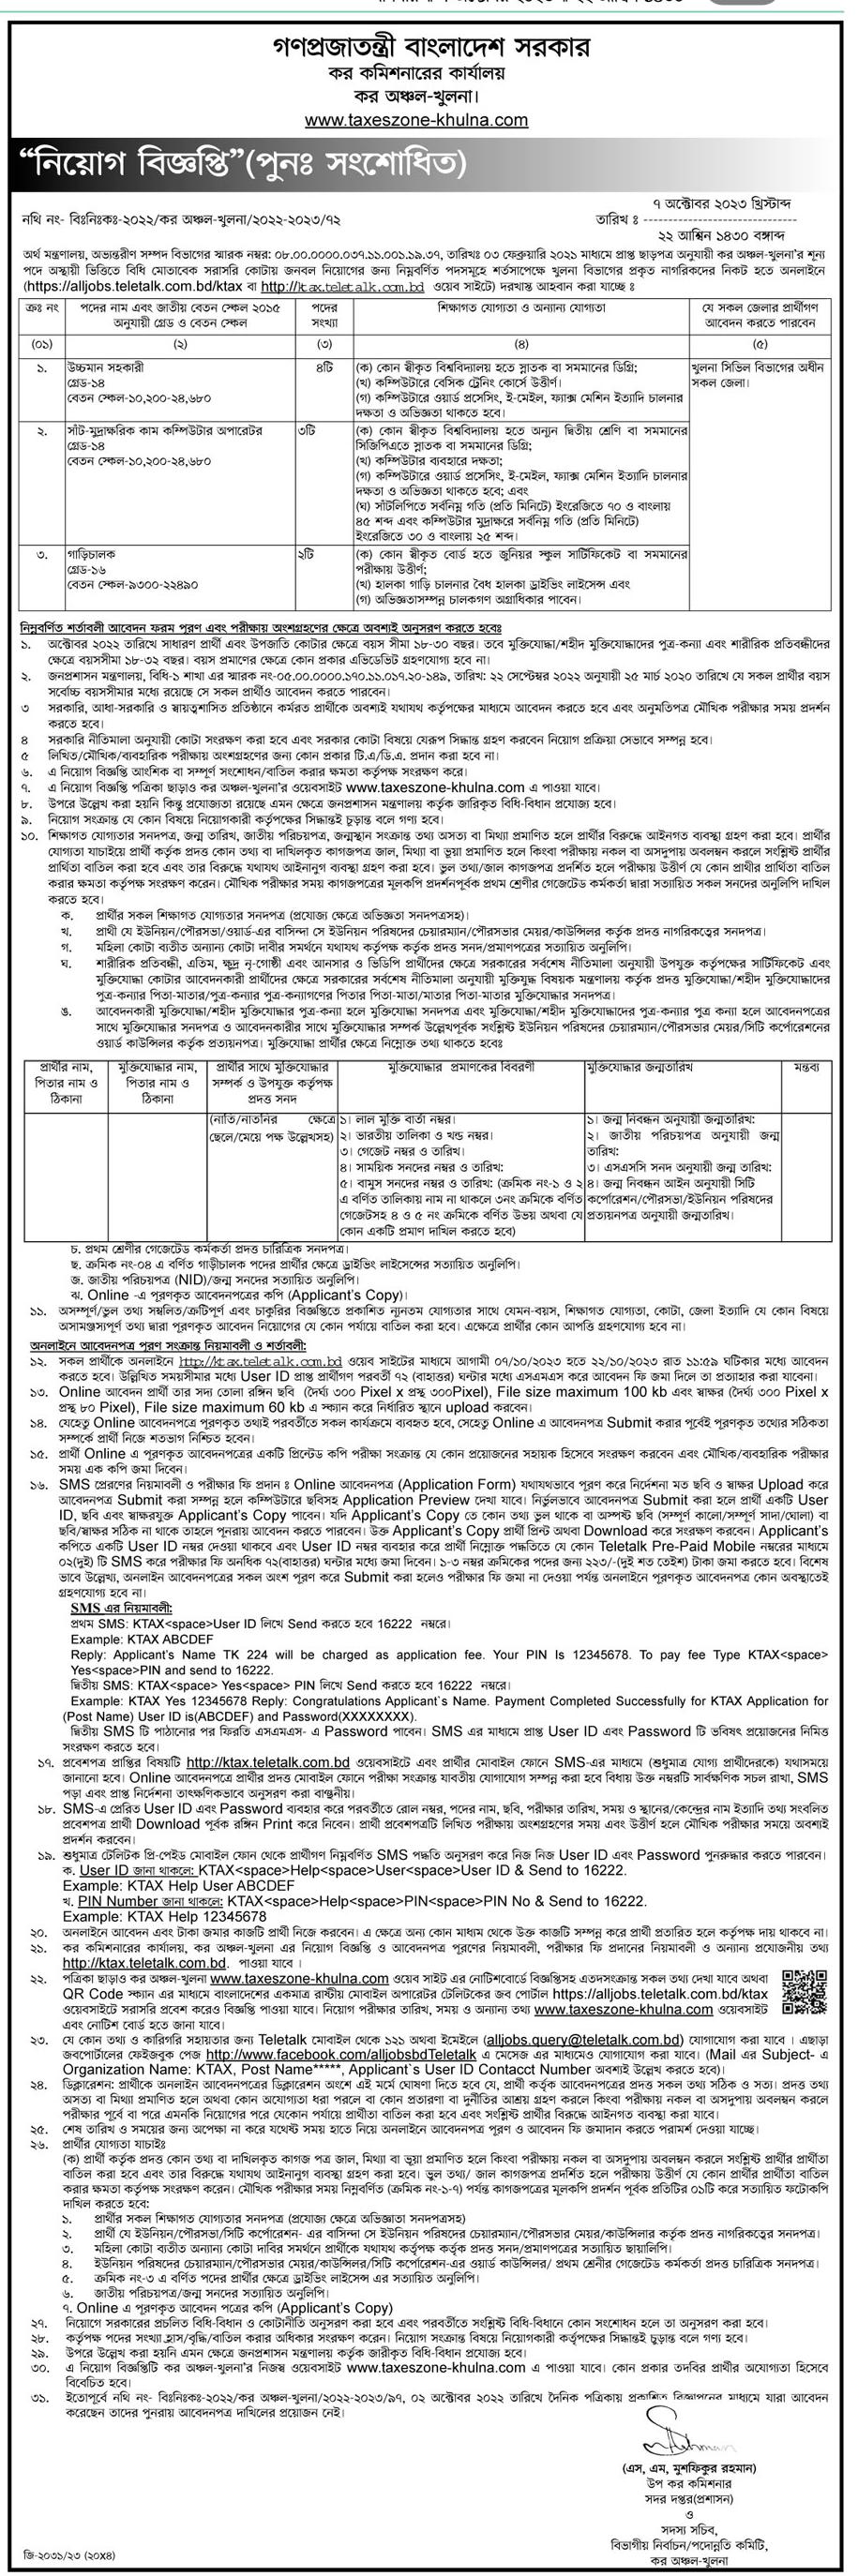 Office of the Tax Commissioner Job Circular BD